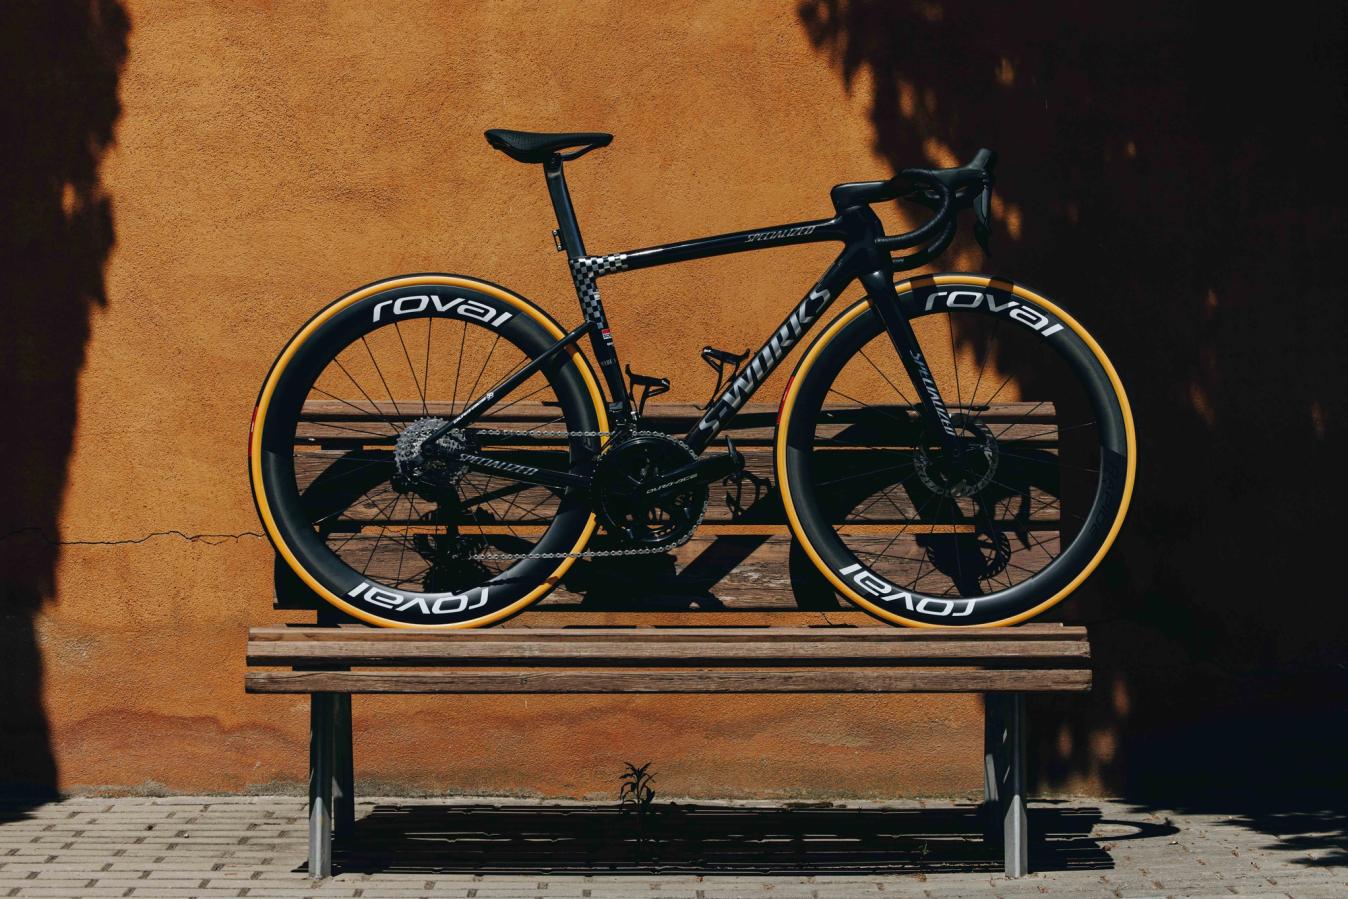 Remco Evenepoel will be using the new S-Works SL8 tarmac for his defence of his Vuelta title